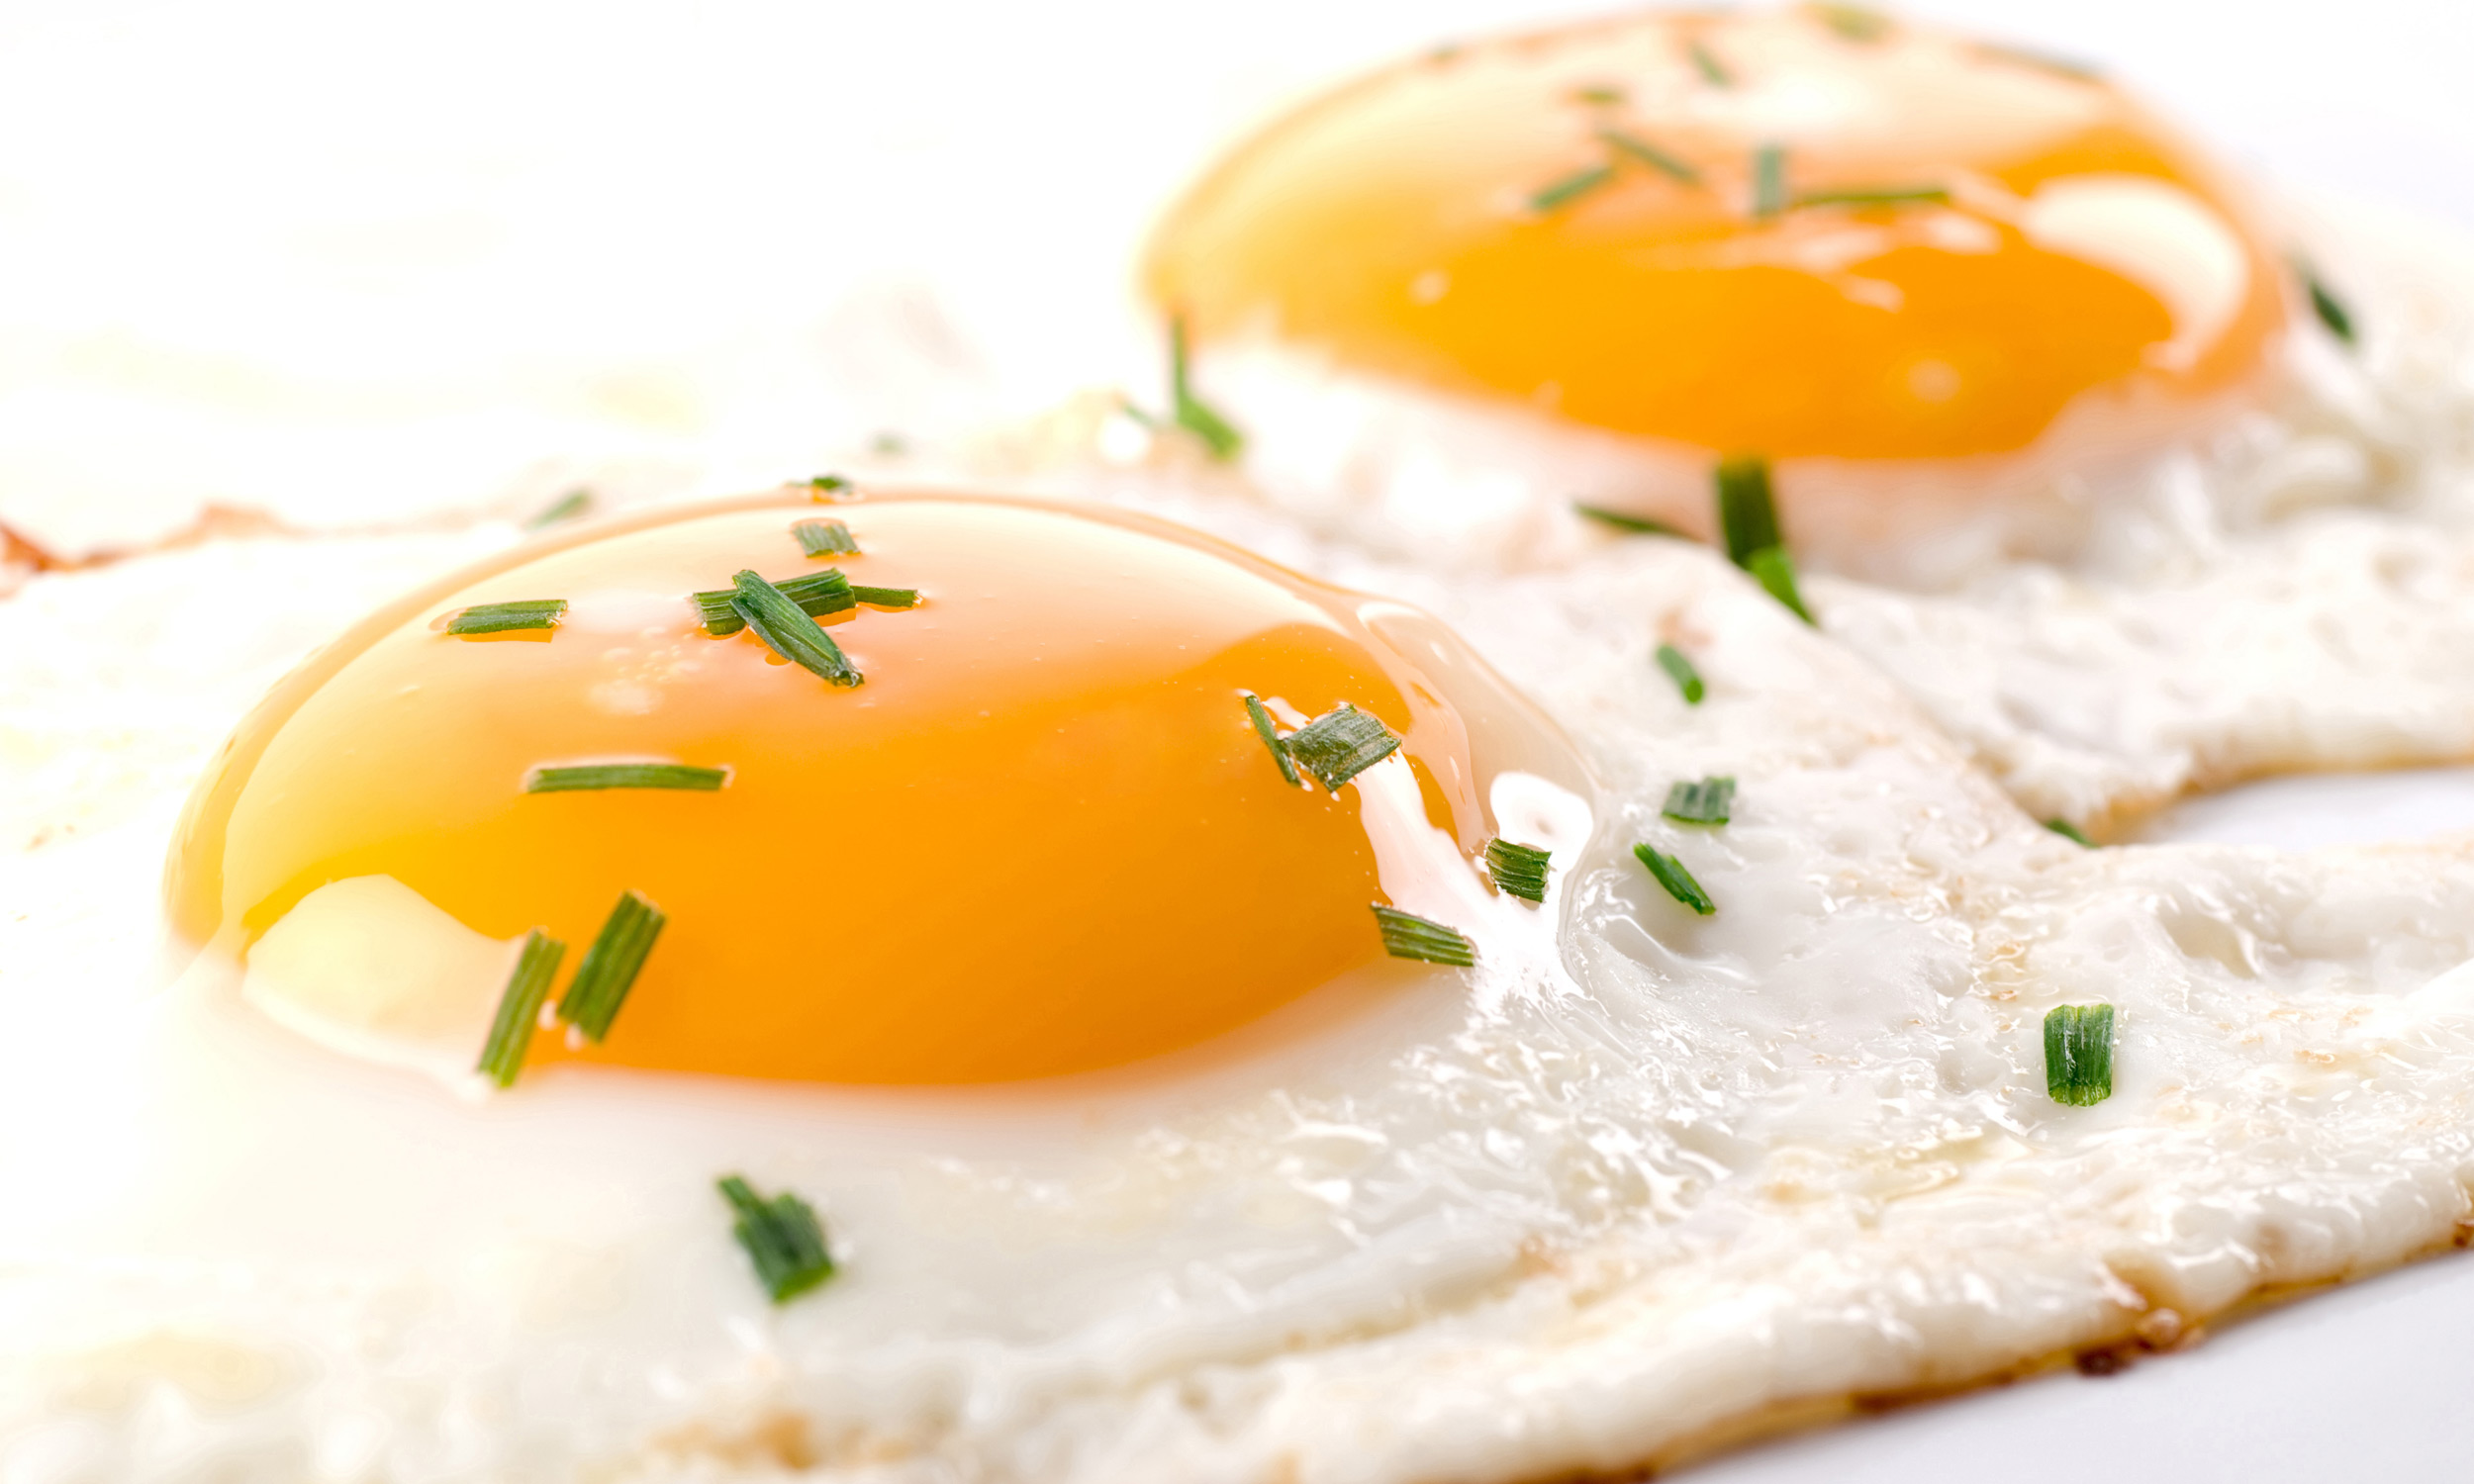 Fried Eggs - Science of Cooking